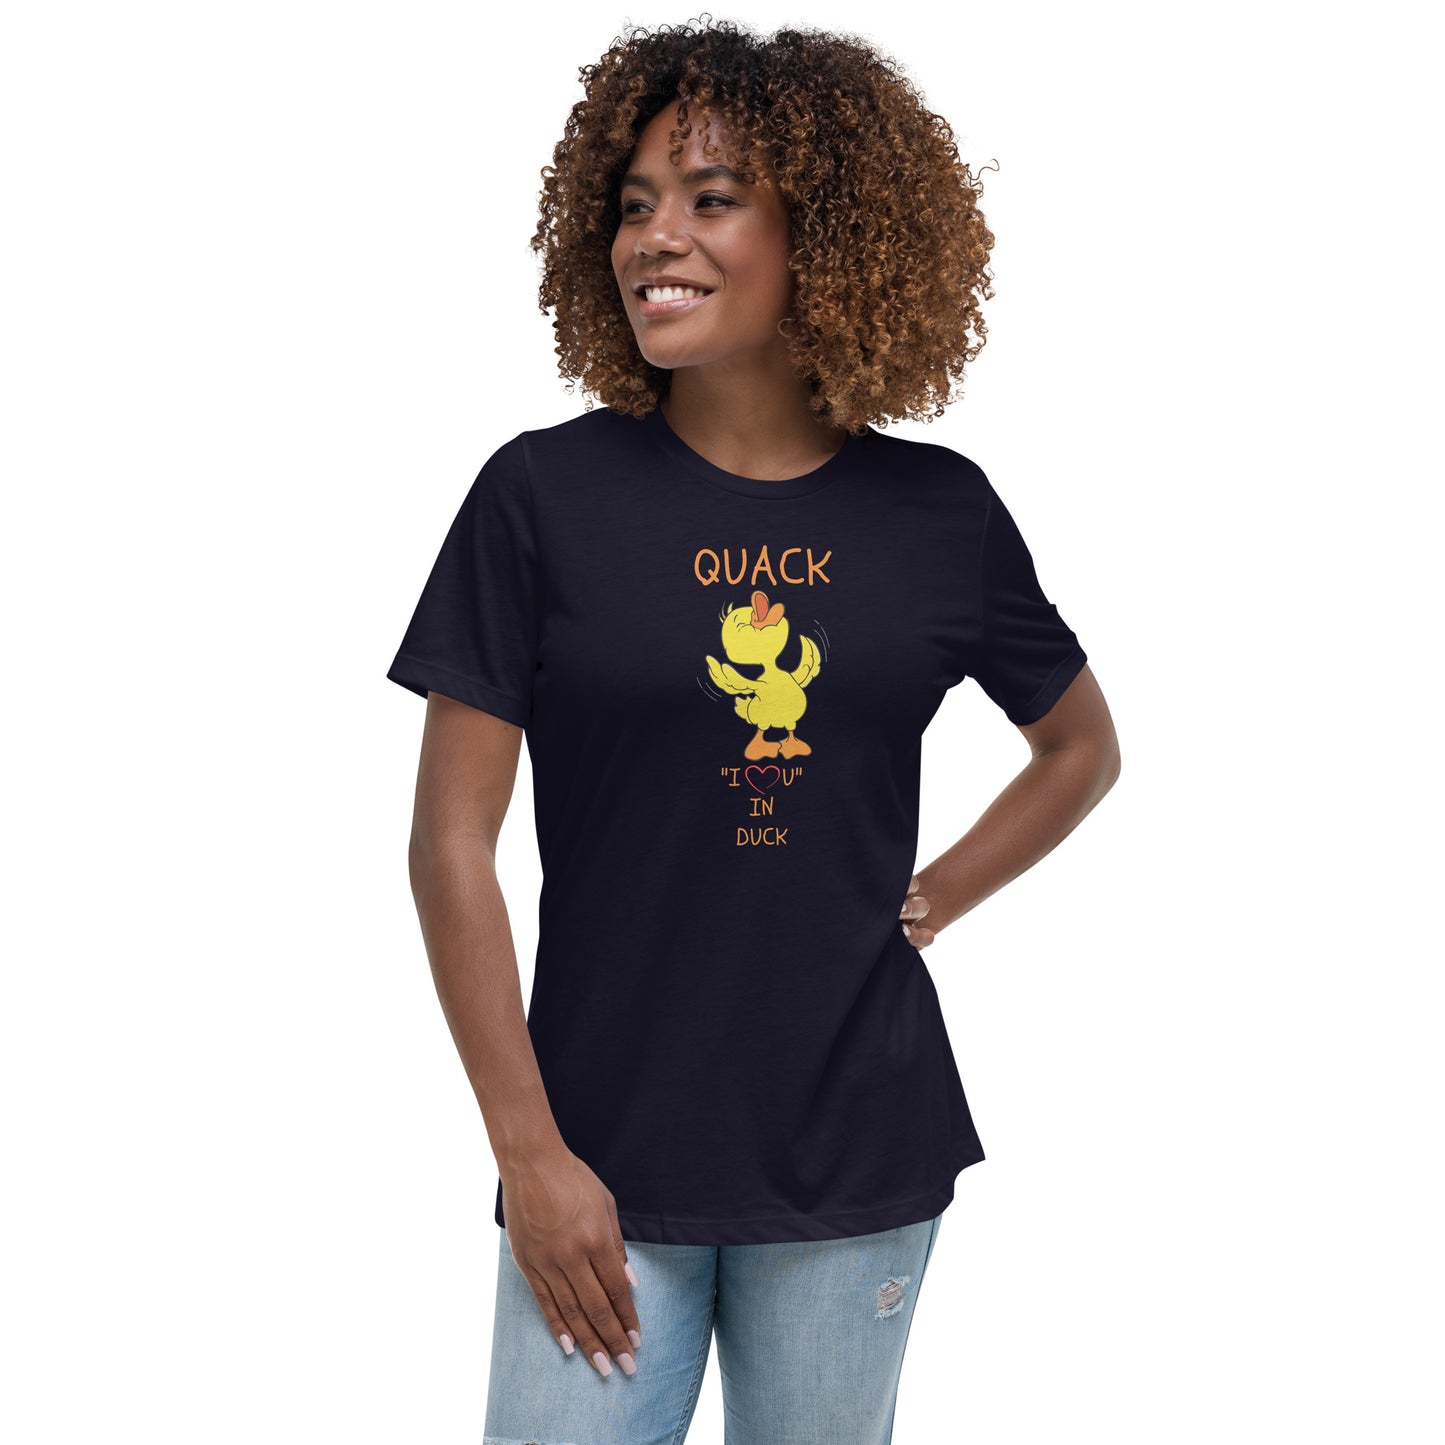 QUACK "I LOVE YOU" IN DUCK Women's Relaxed T-Shirt